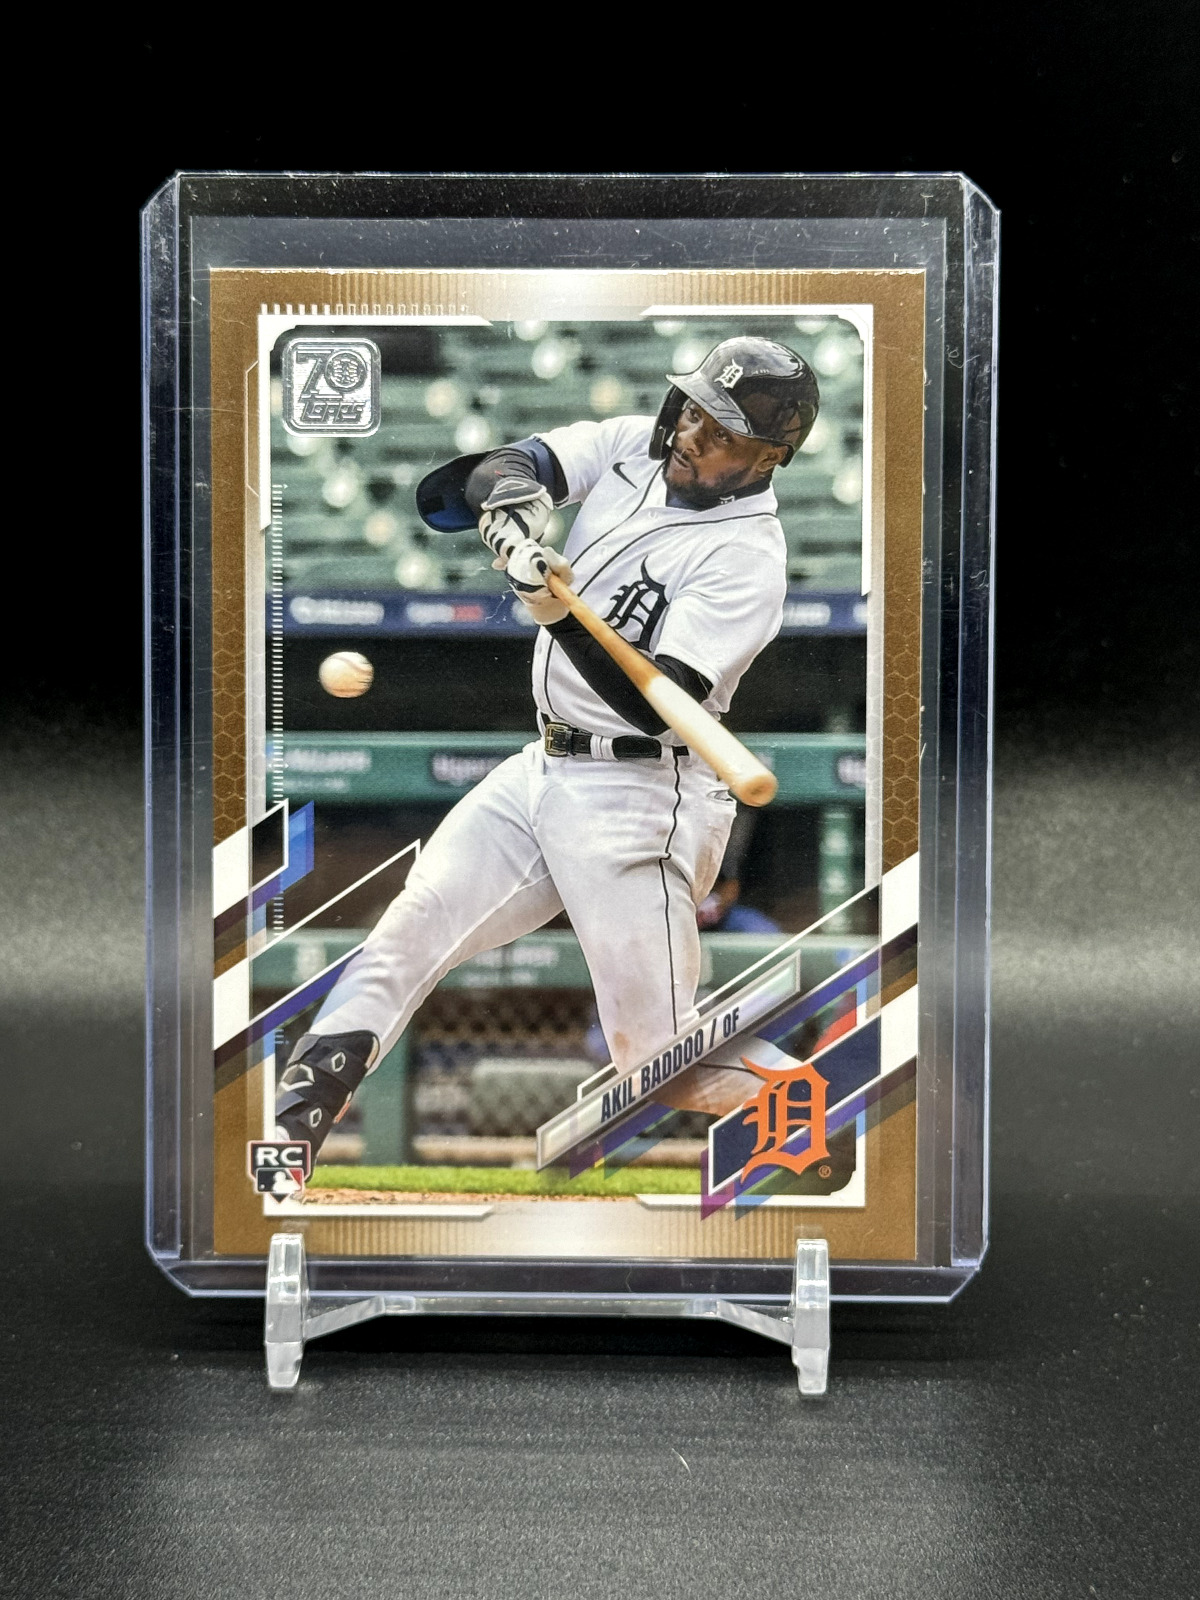 2021 Topps Update Akil Baddoo Gold Parallel /2021 Rookie RC #US196 Tigers SP